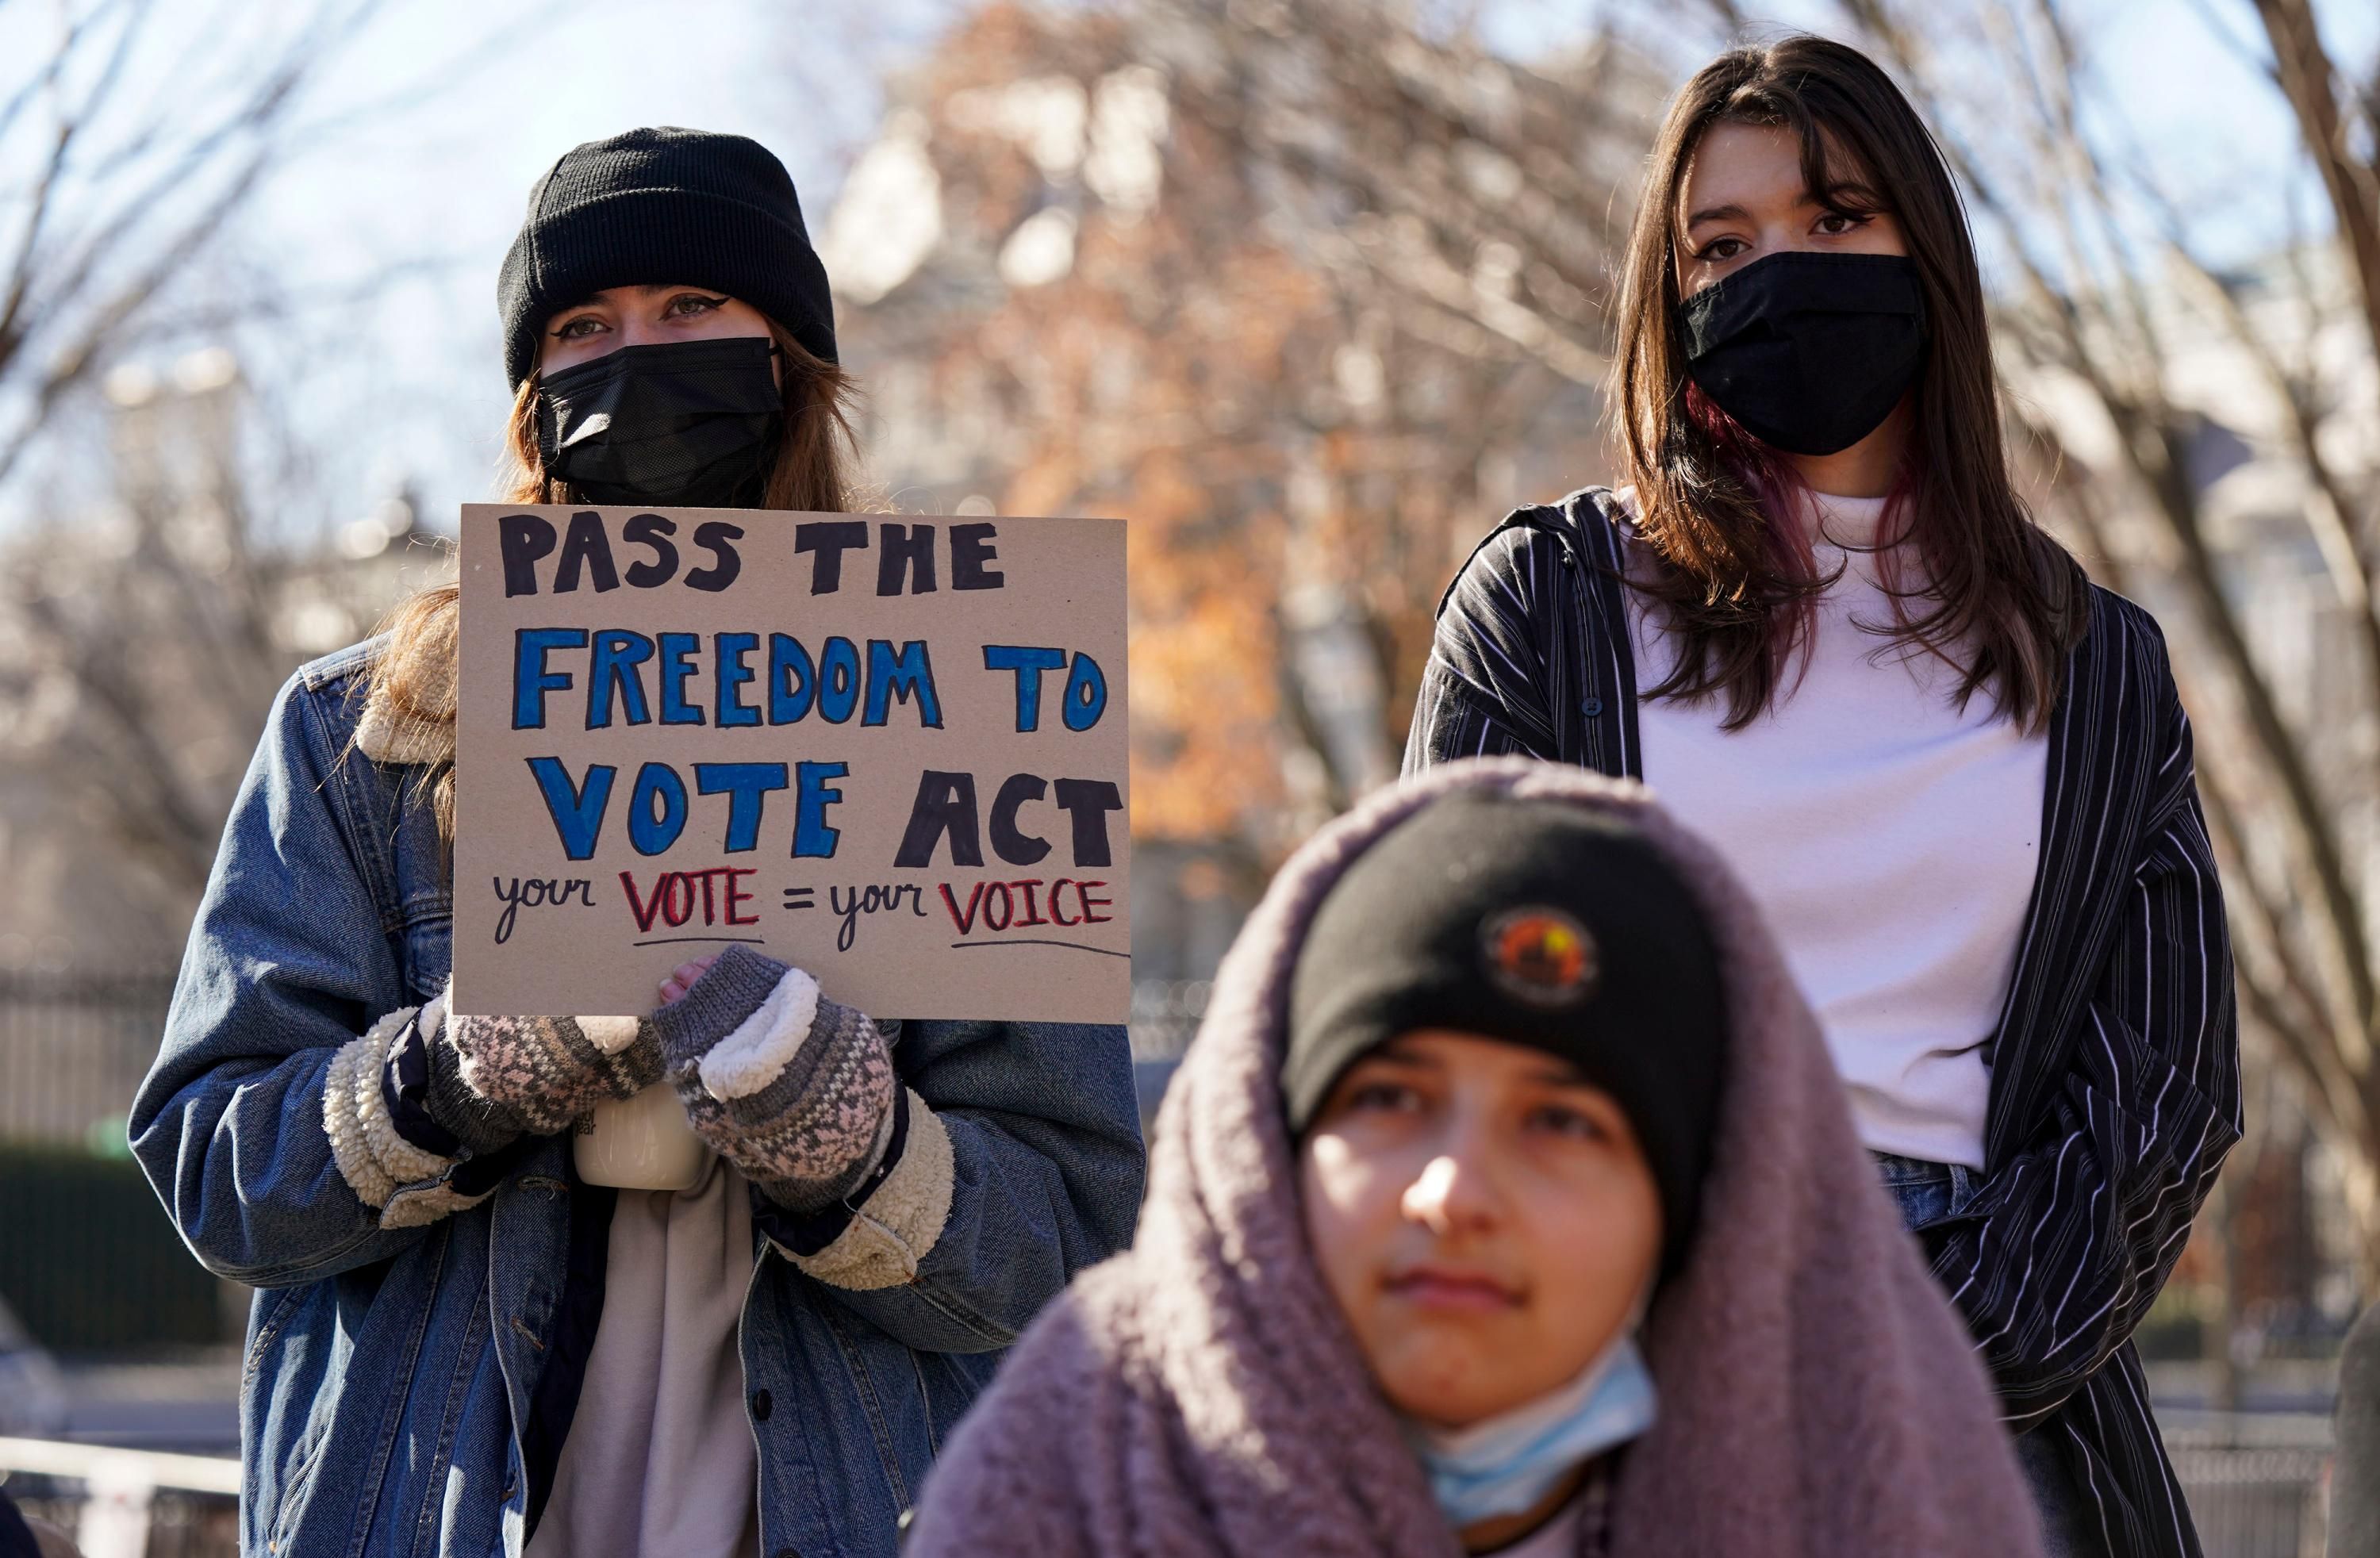 Students demonstrate in support of voting rights